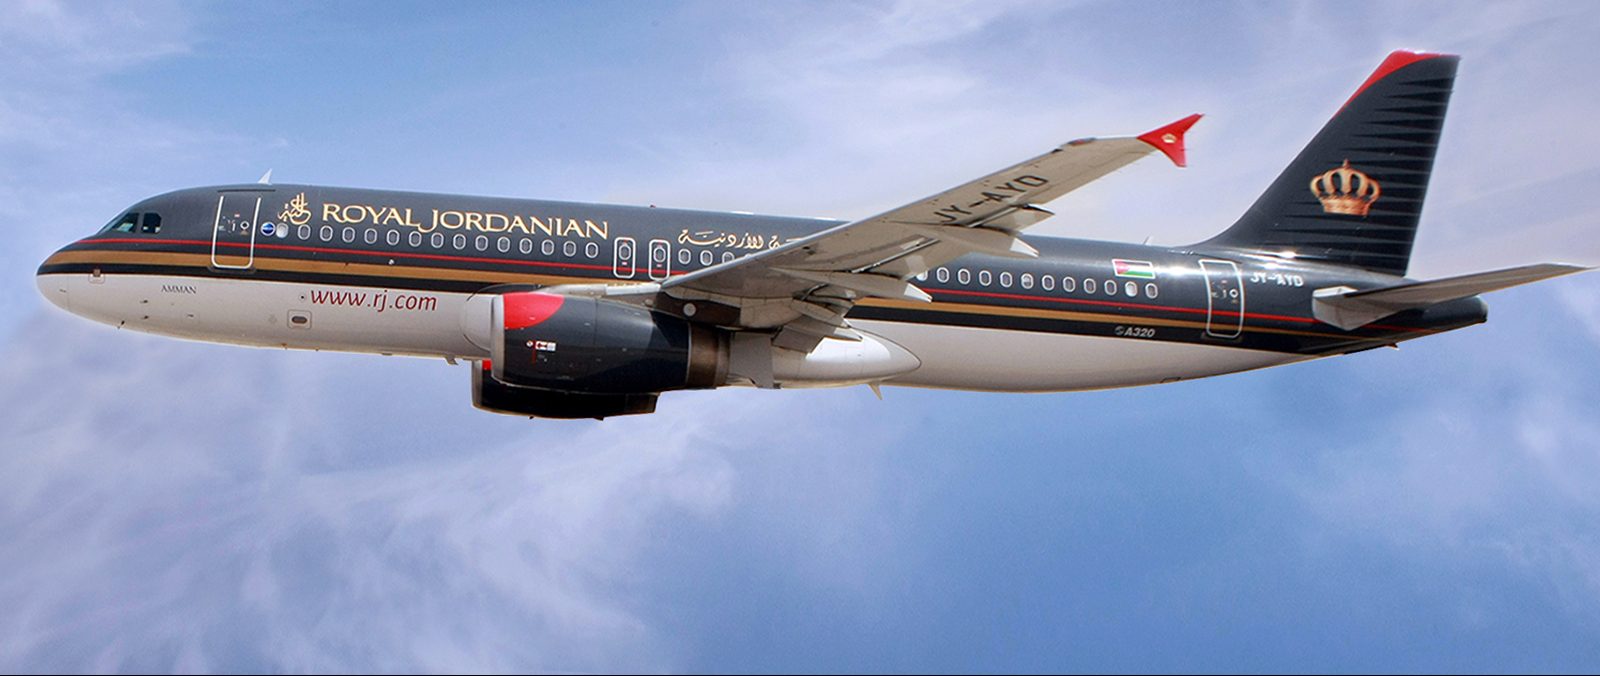 Hawker Pacific provides Royal Jordanian’s Embraer fleet with landing gear services